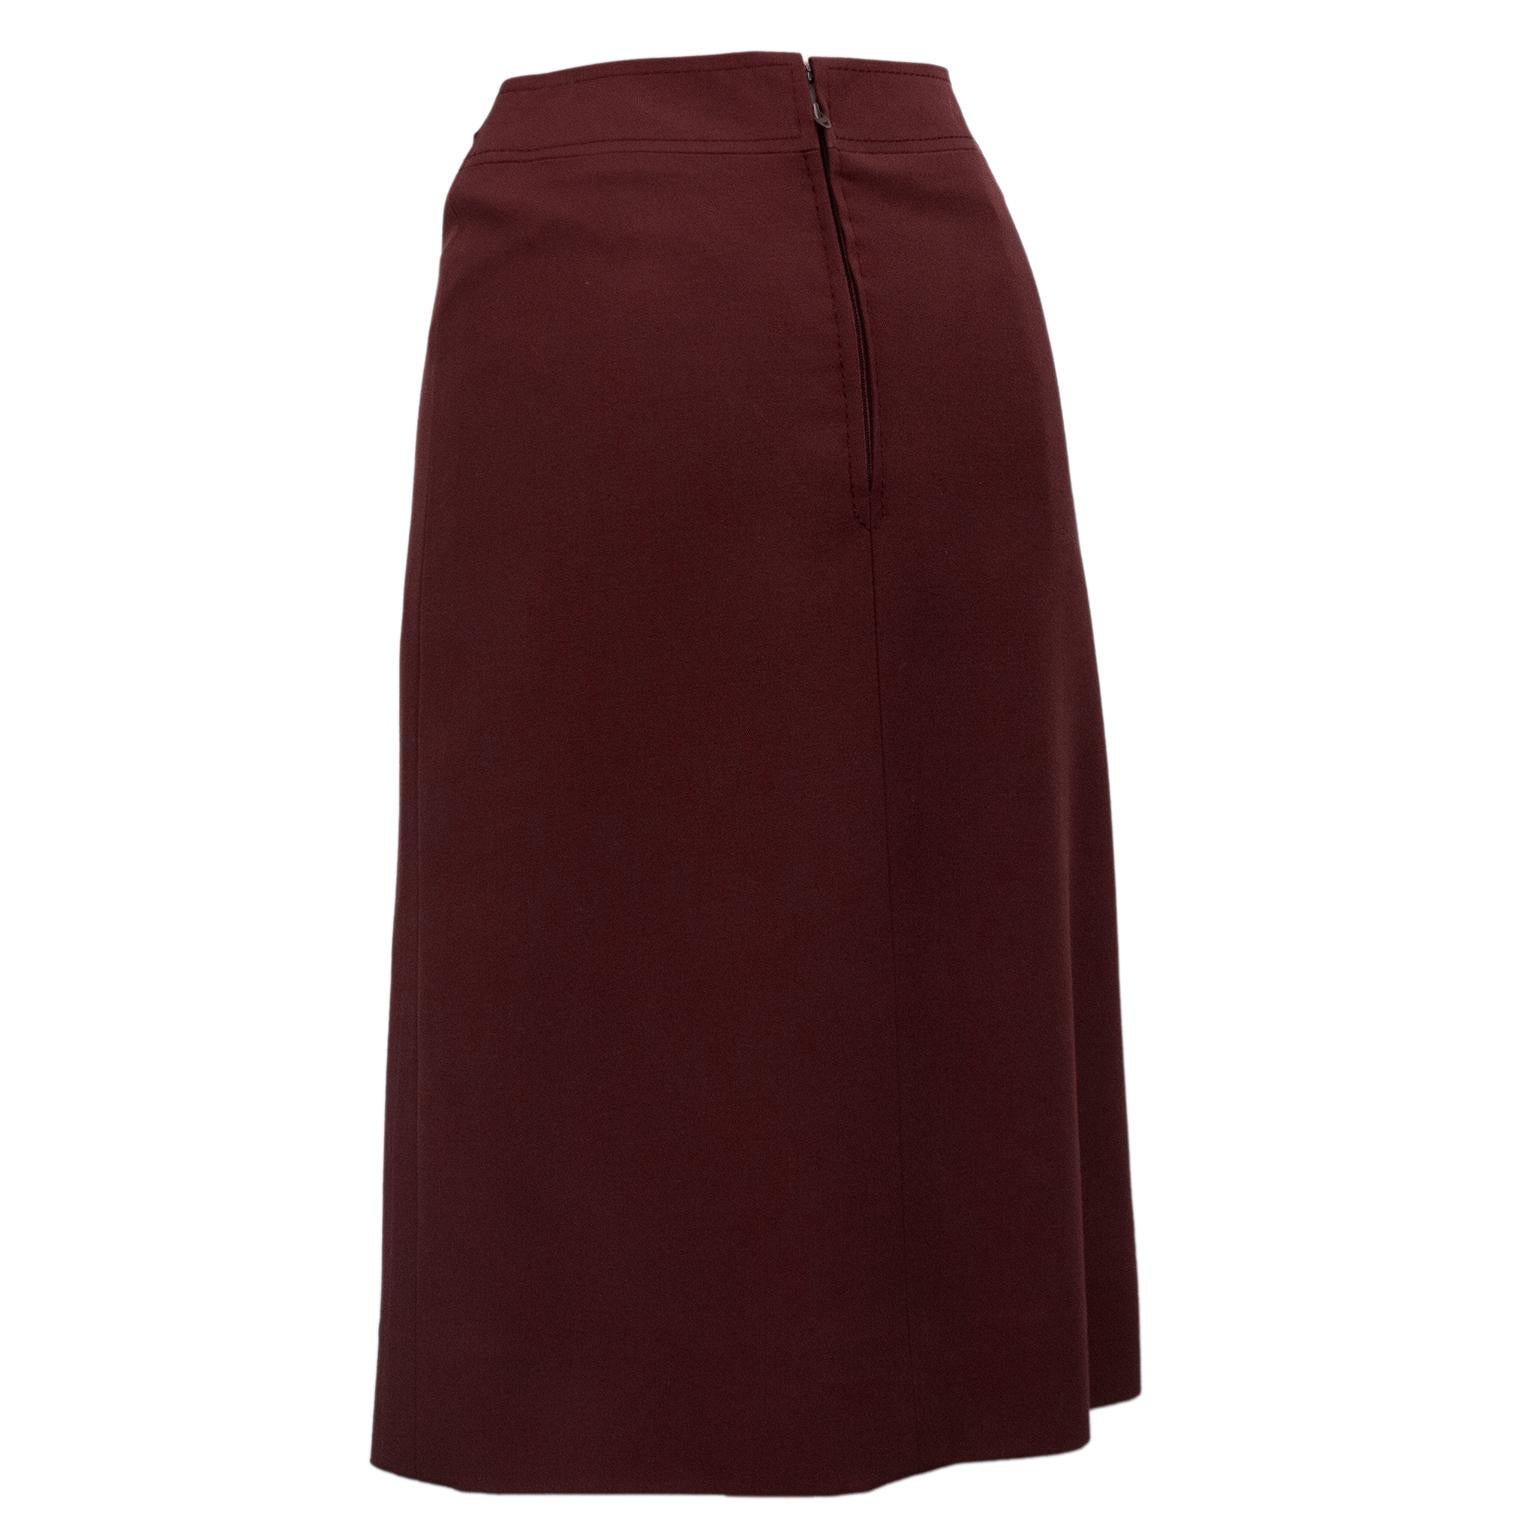 1970's classic Celine maroon wool gabardine wrap style skirt with pleating. Faux gold tone and leather maroon buckle at left hip. Overall A line shape. In excellent condition, side zipper with hook and eye. Fits like a US size 2. Made in France.